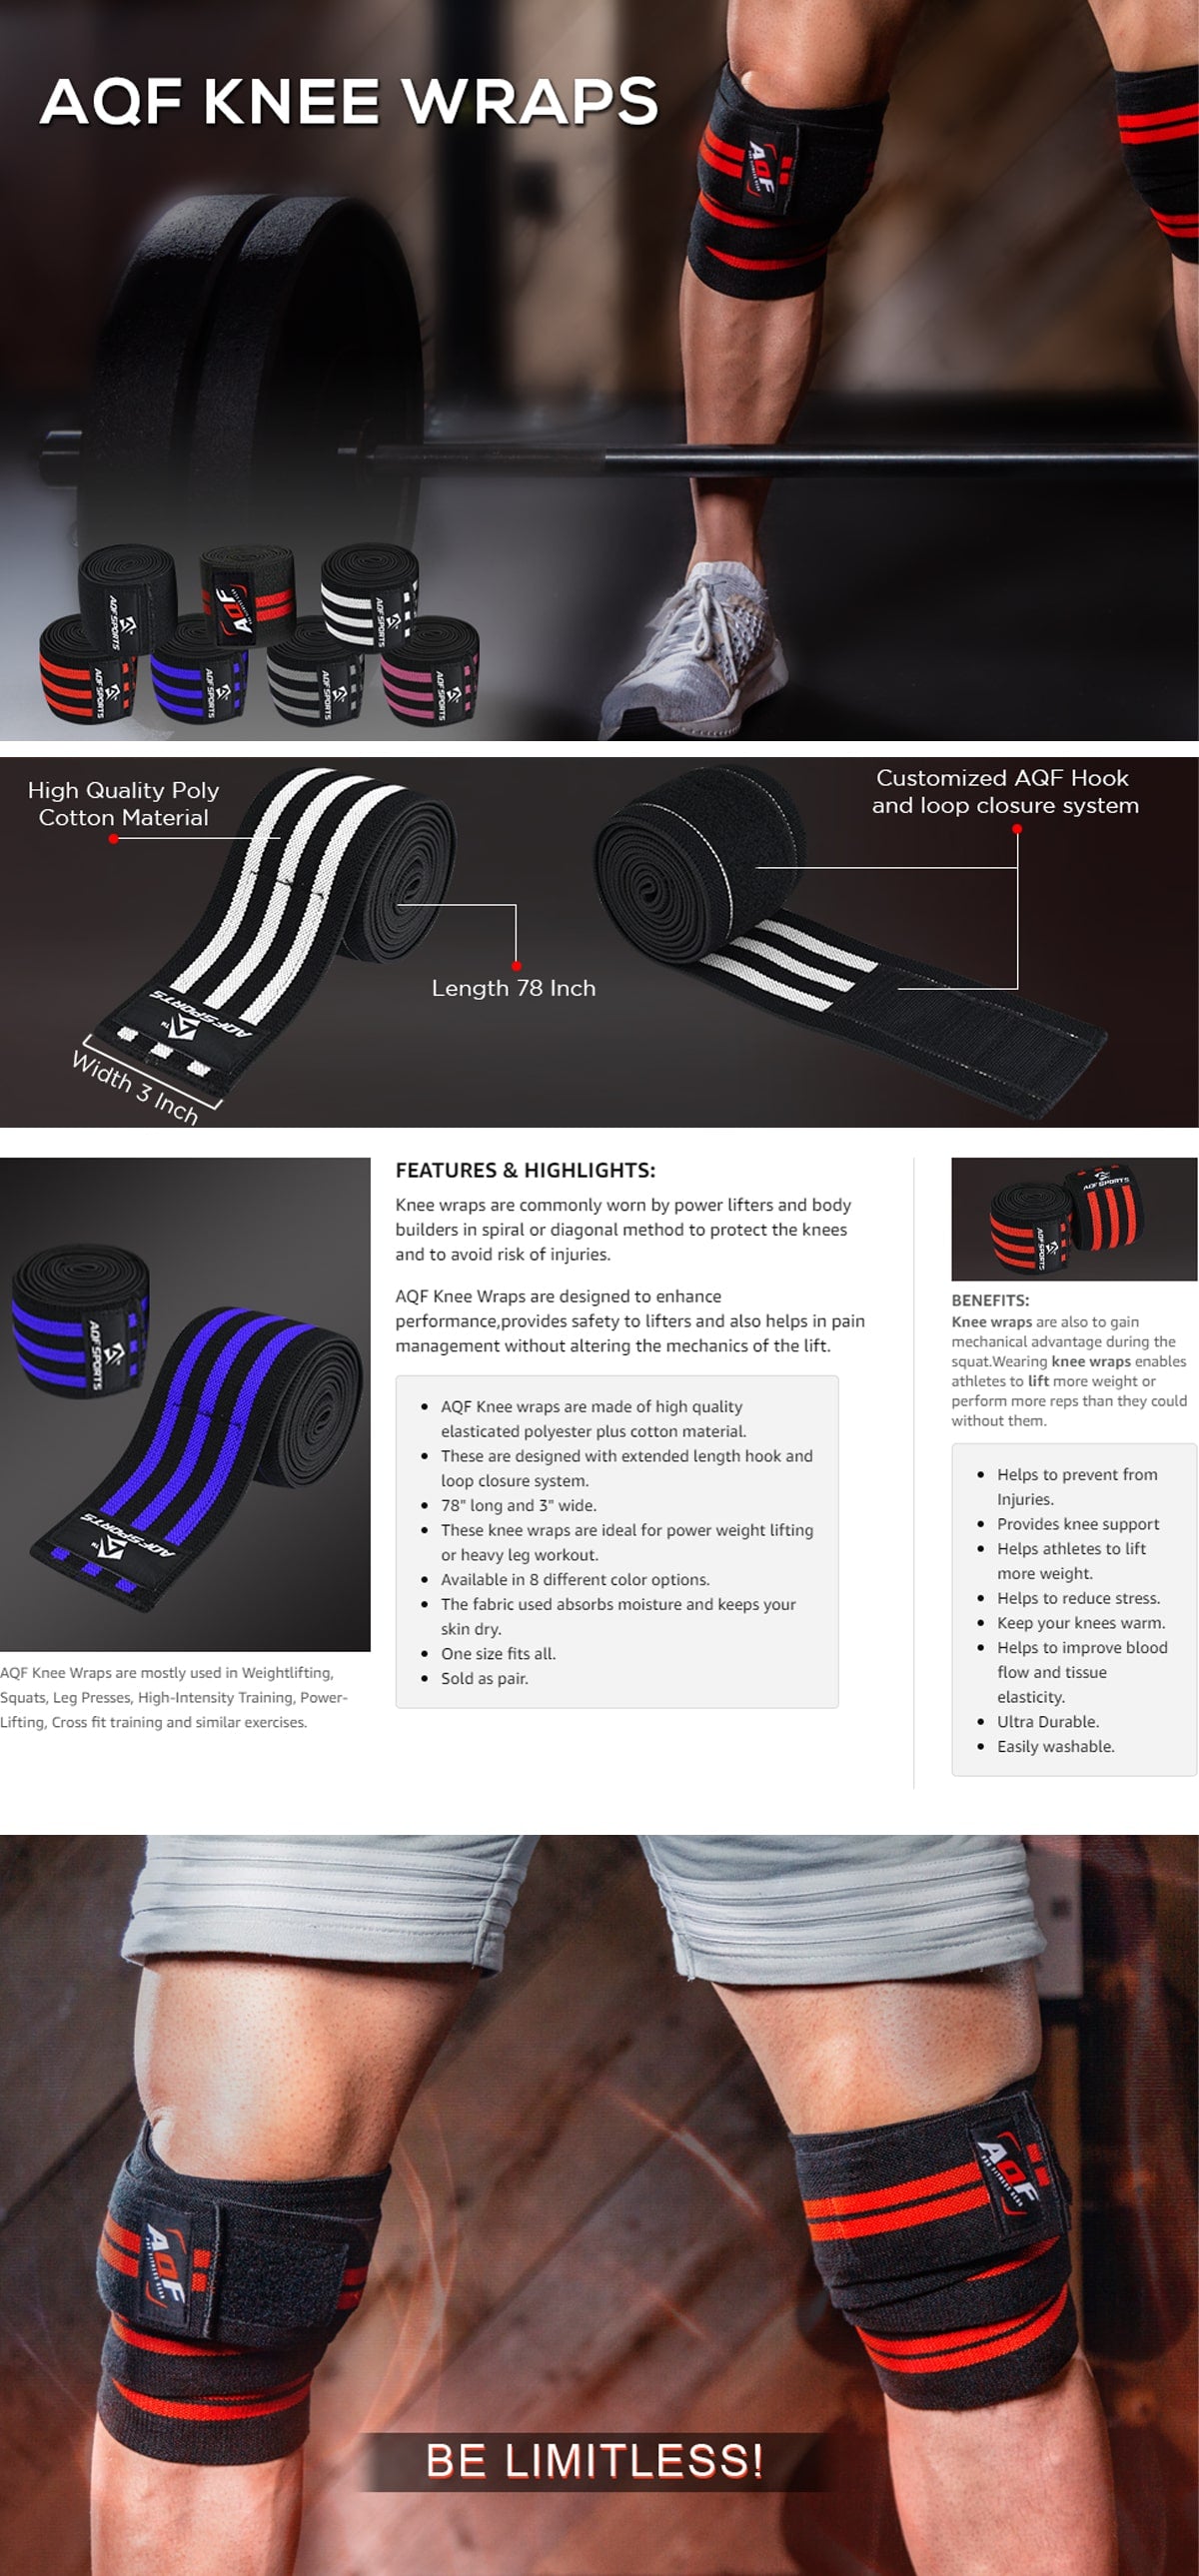 Features of AQF Sports Knee Wrap